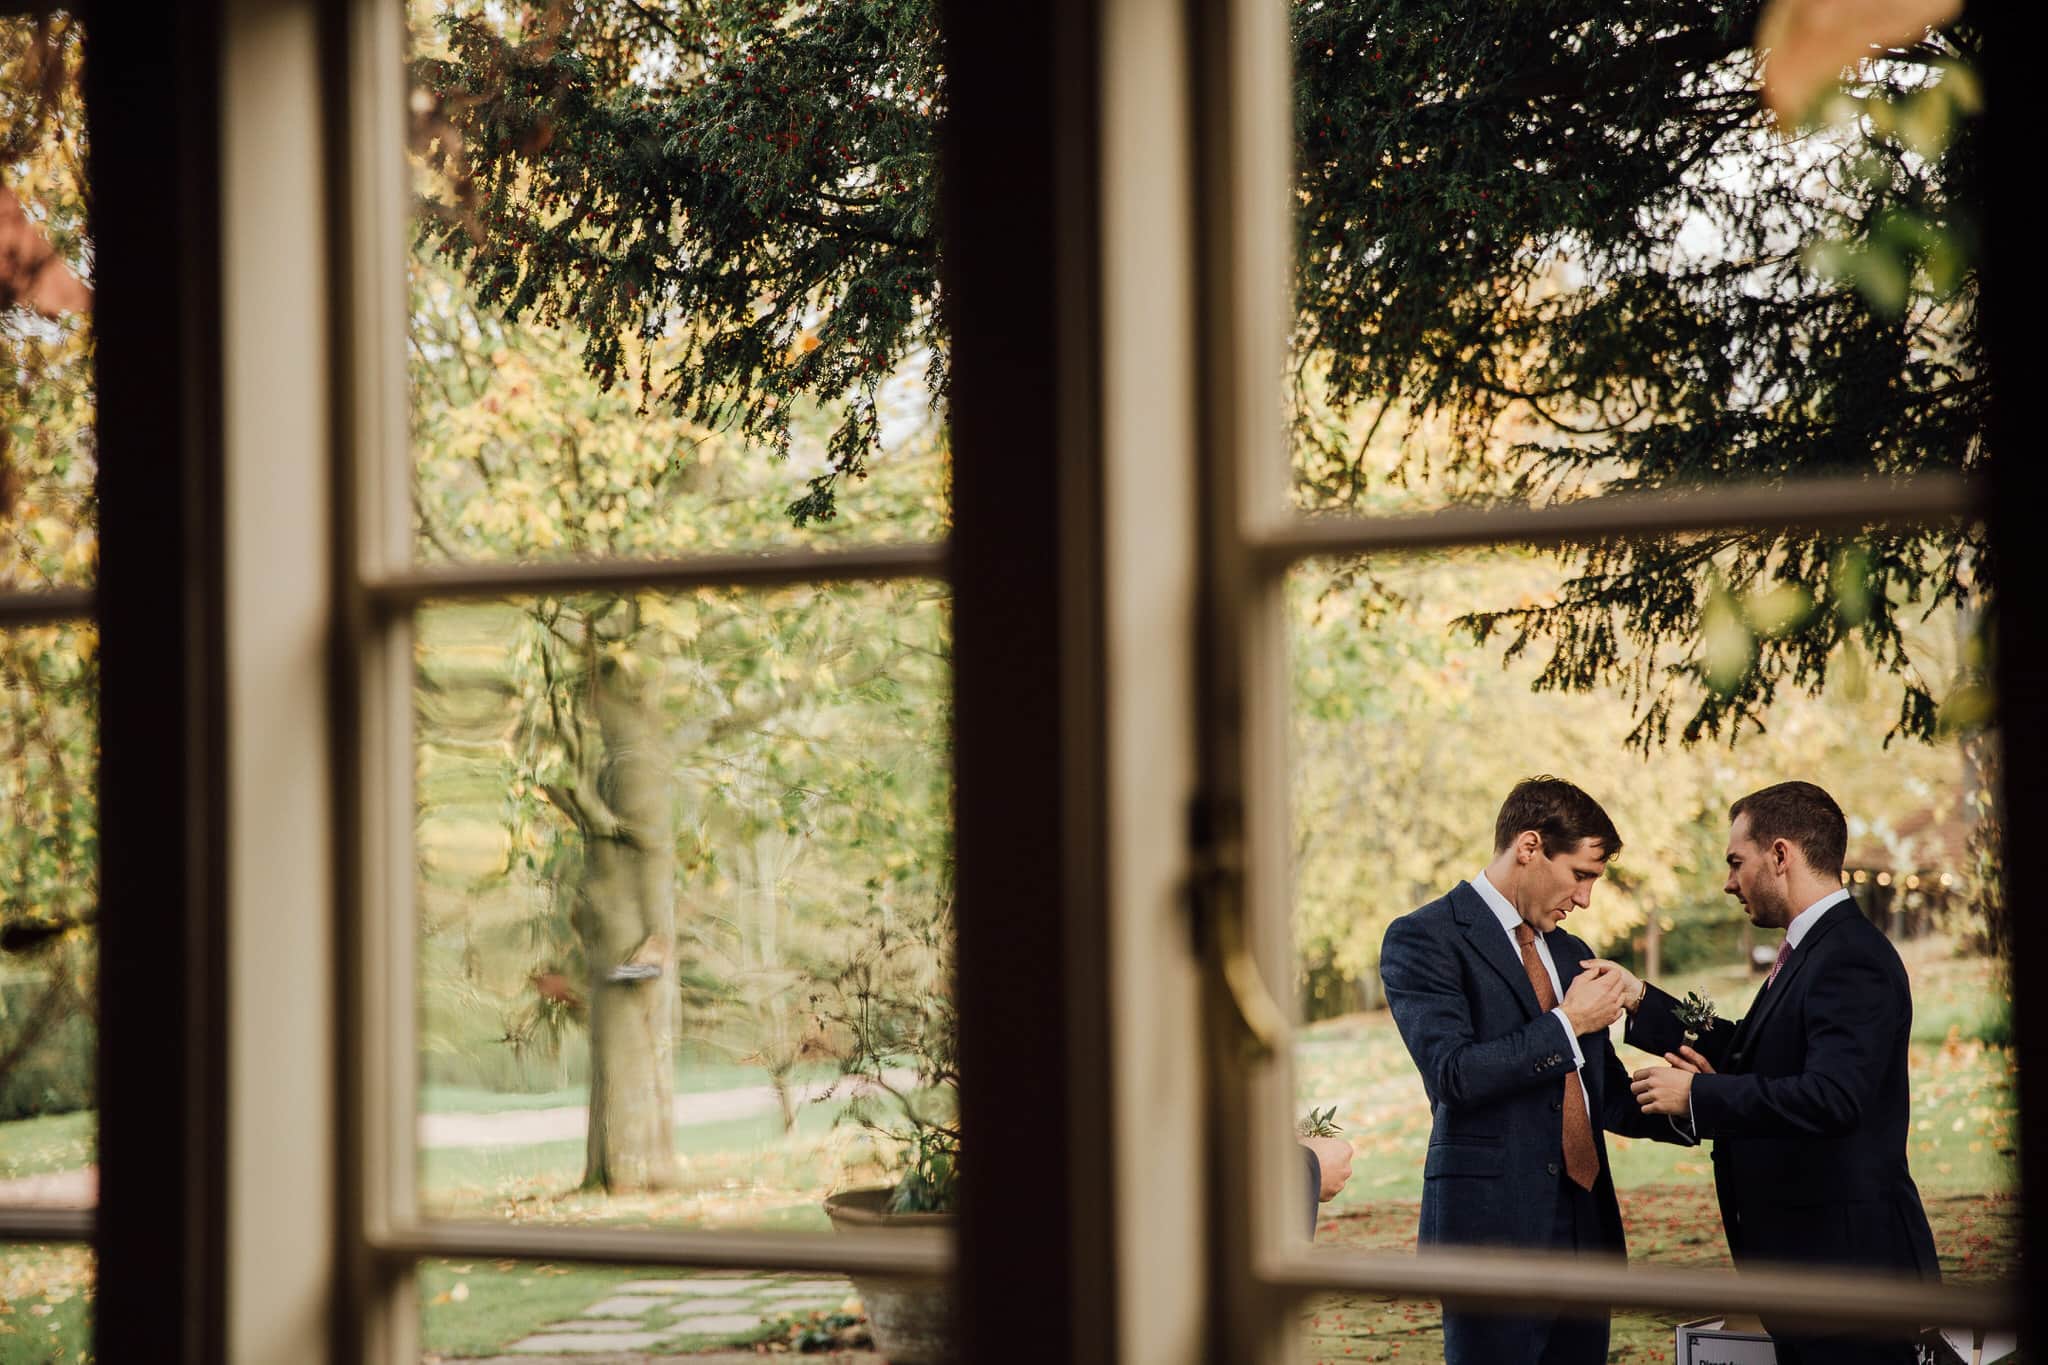 Groom framed in window putting on button hole